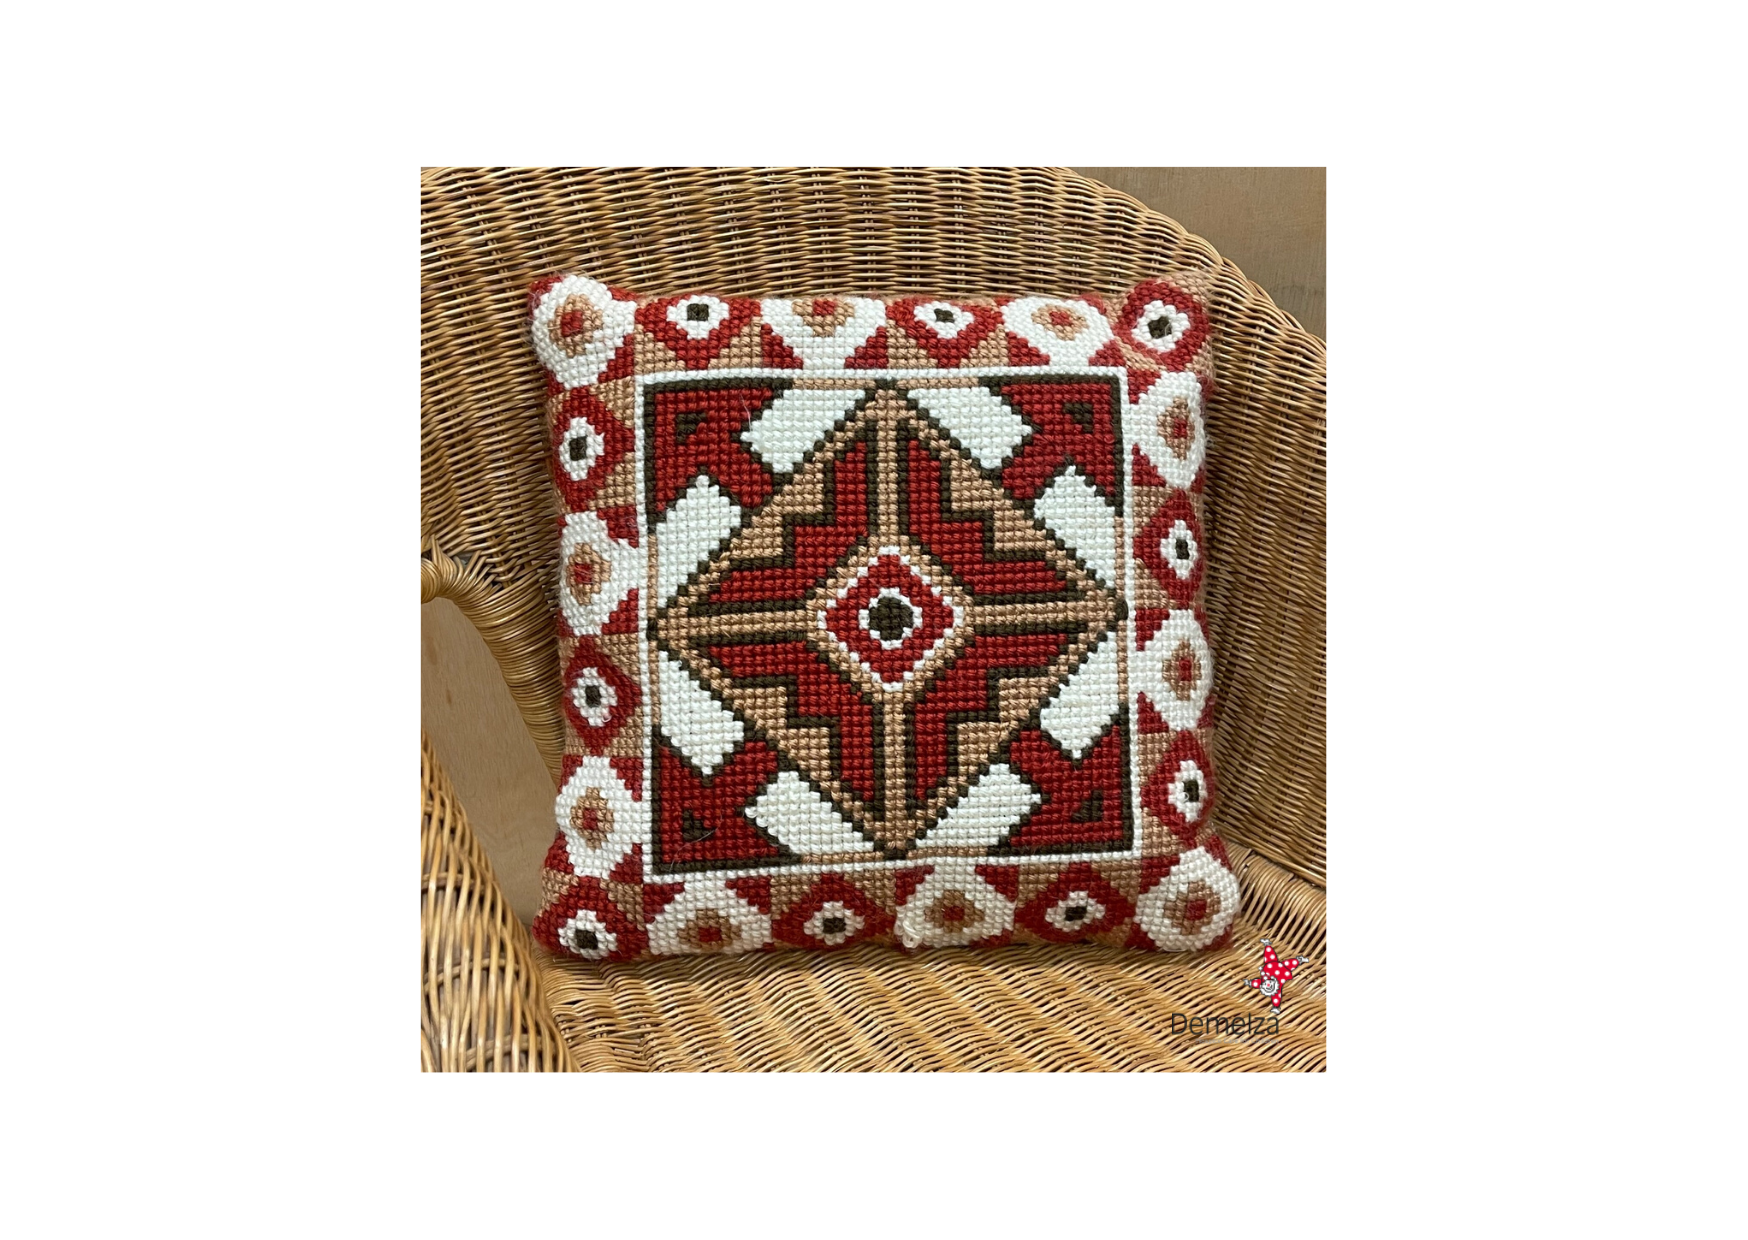 Front of Handmade Crochet Knit Abstract Design Square Cushion